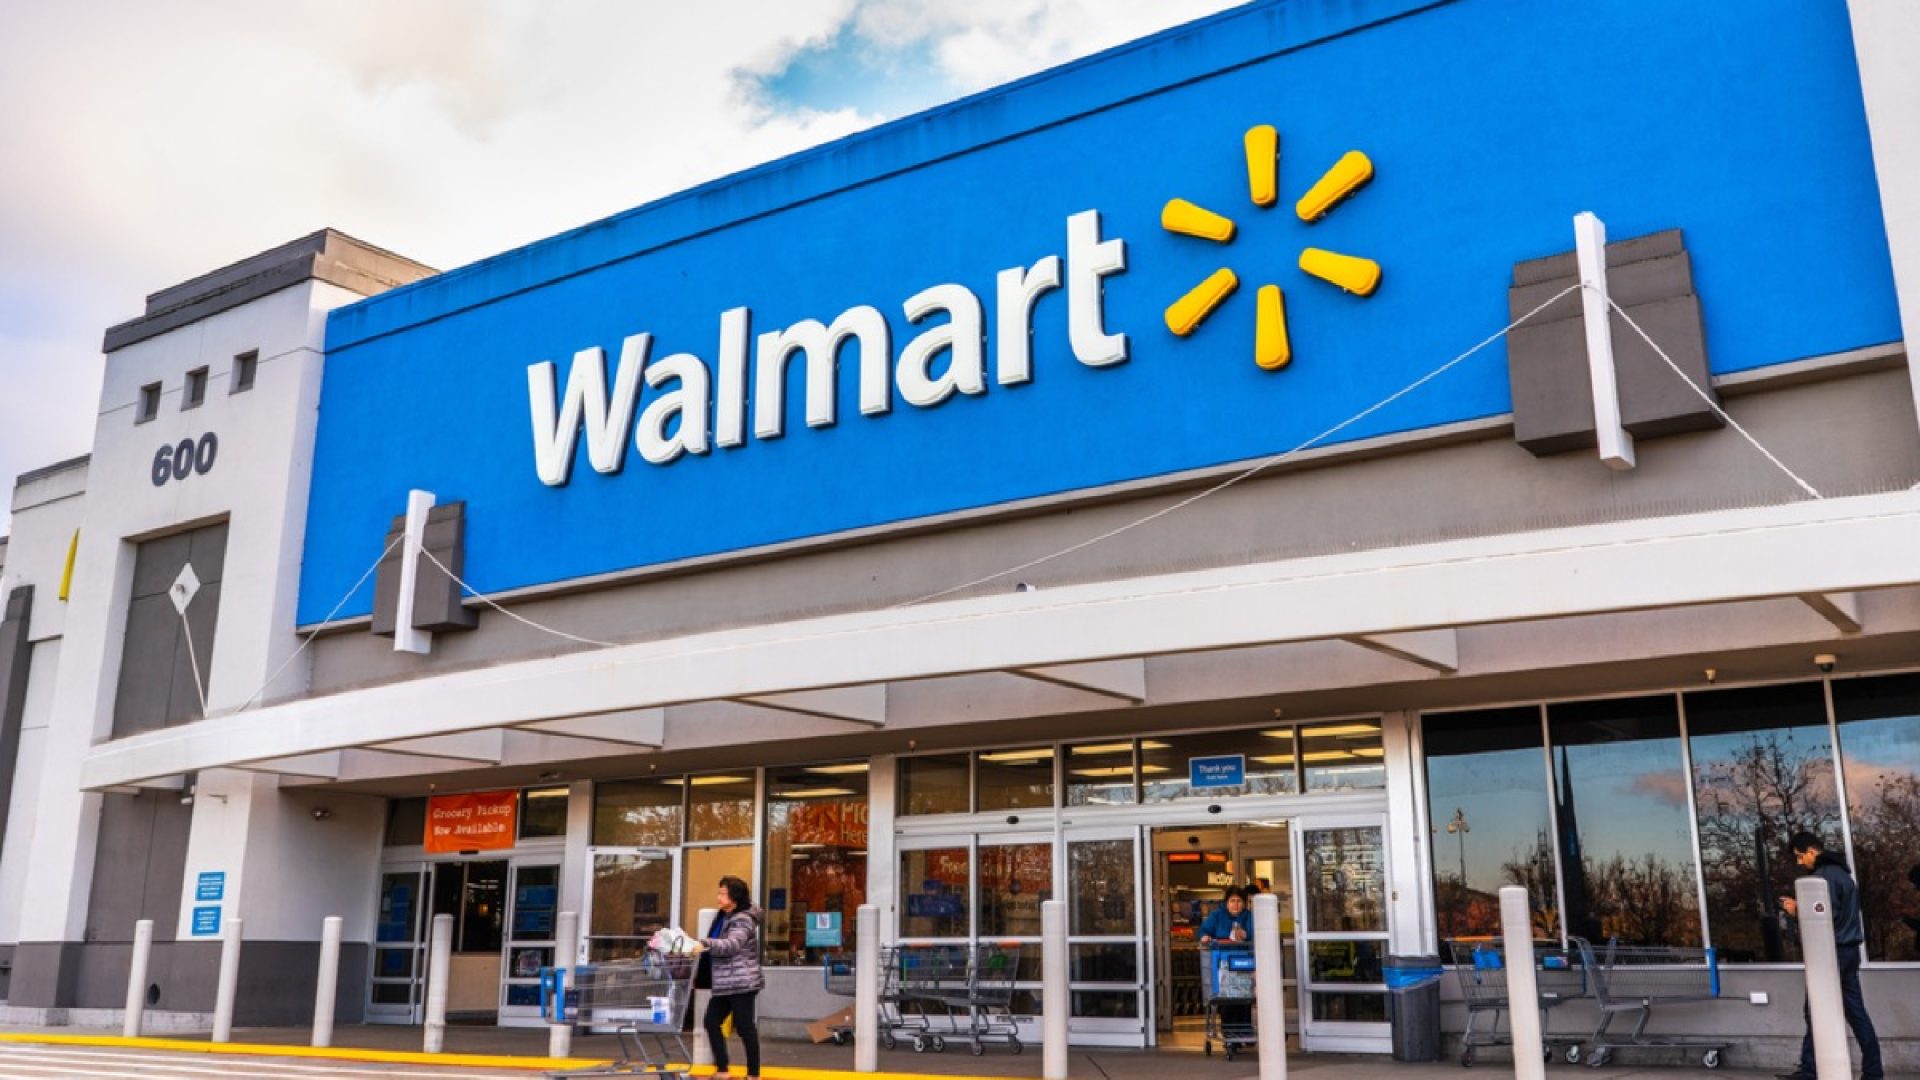 27 Things to Never Buy at Walmart, According to Experts and Consumers